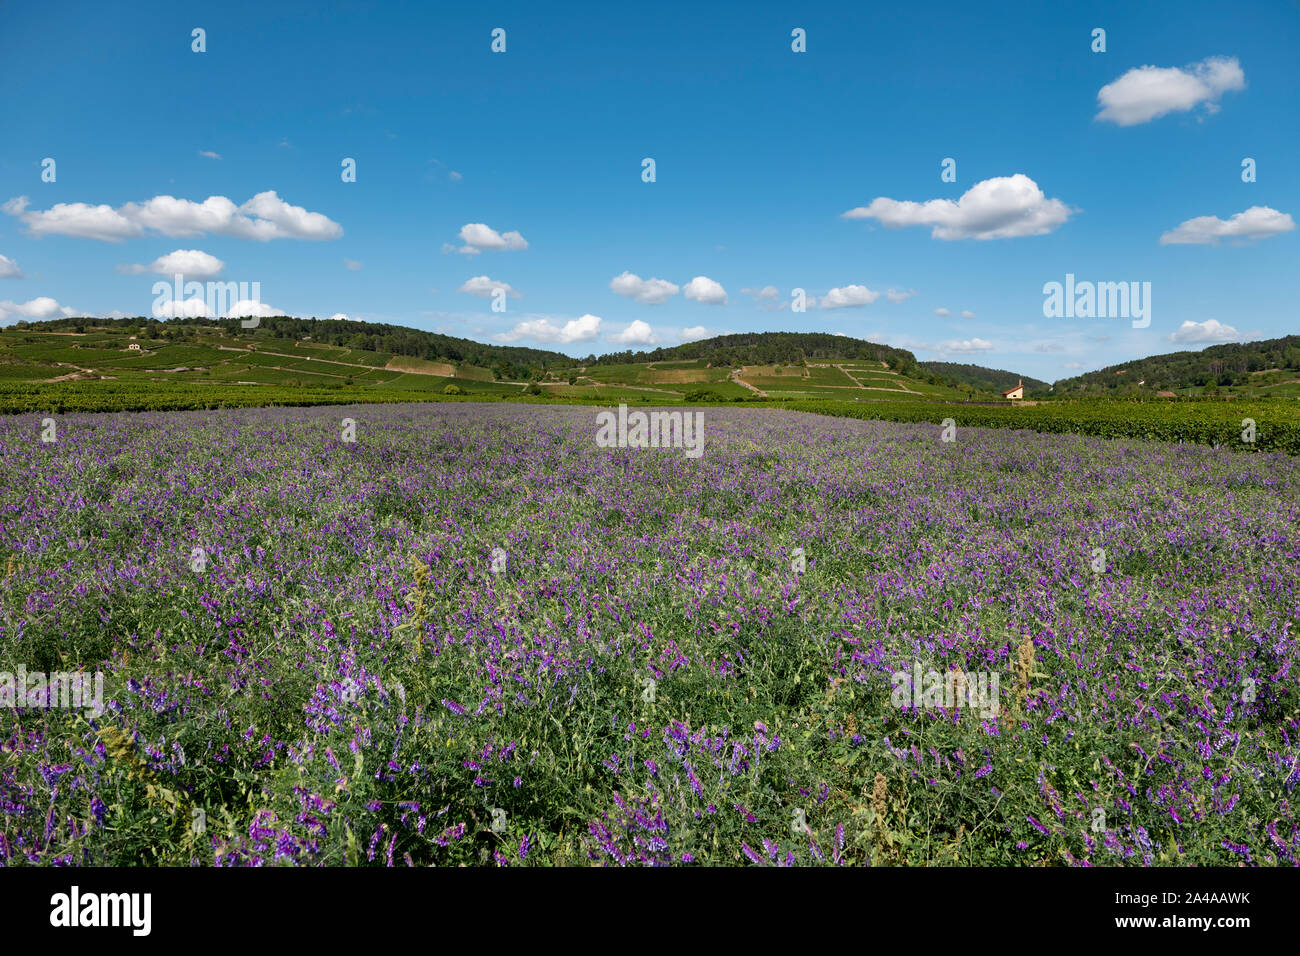 Vicia cracca flowers planted between vines, Cote de Beaune, France. Stock Photo